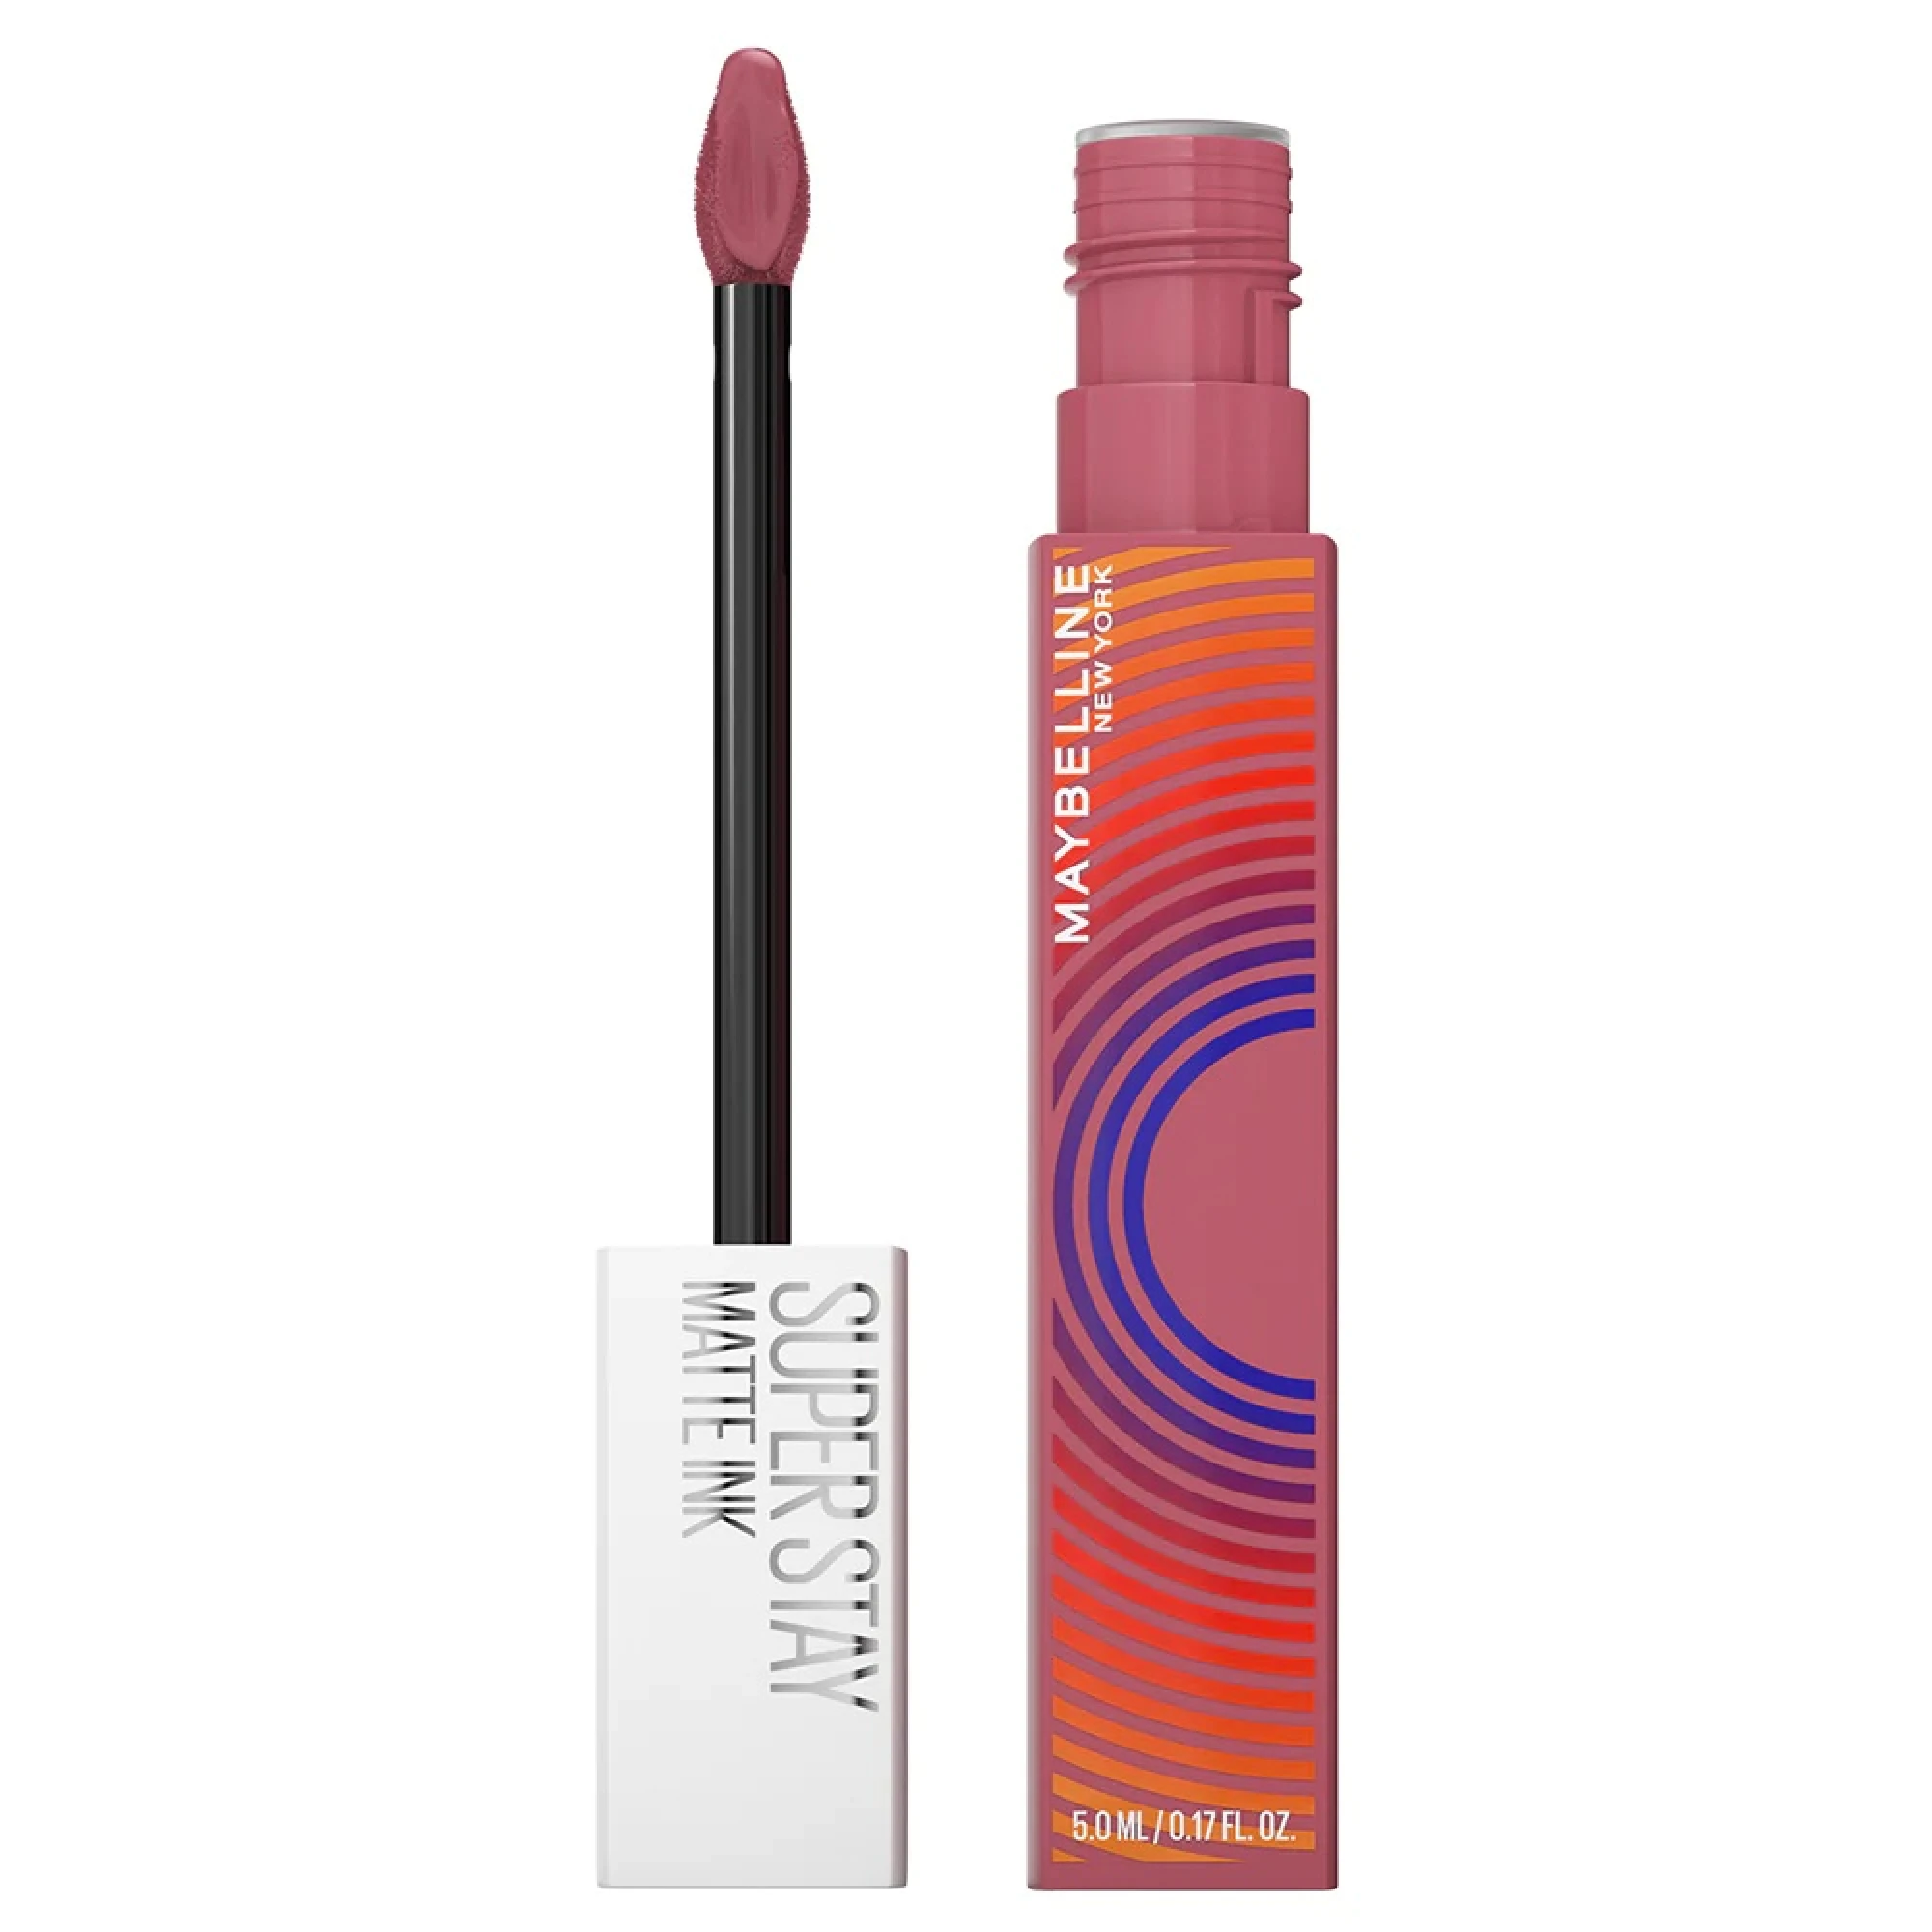 MAYB SUPERSTAY MATTE INK ENTERTAINER n/a 